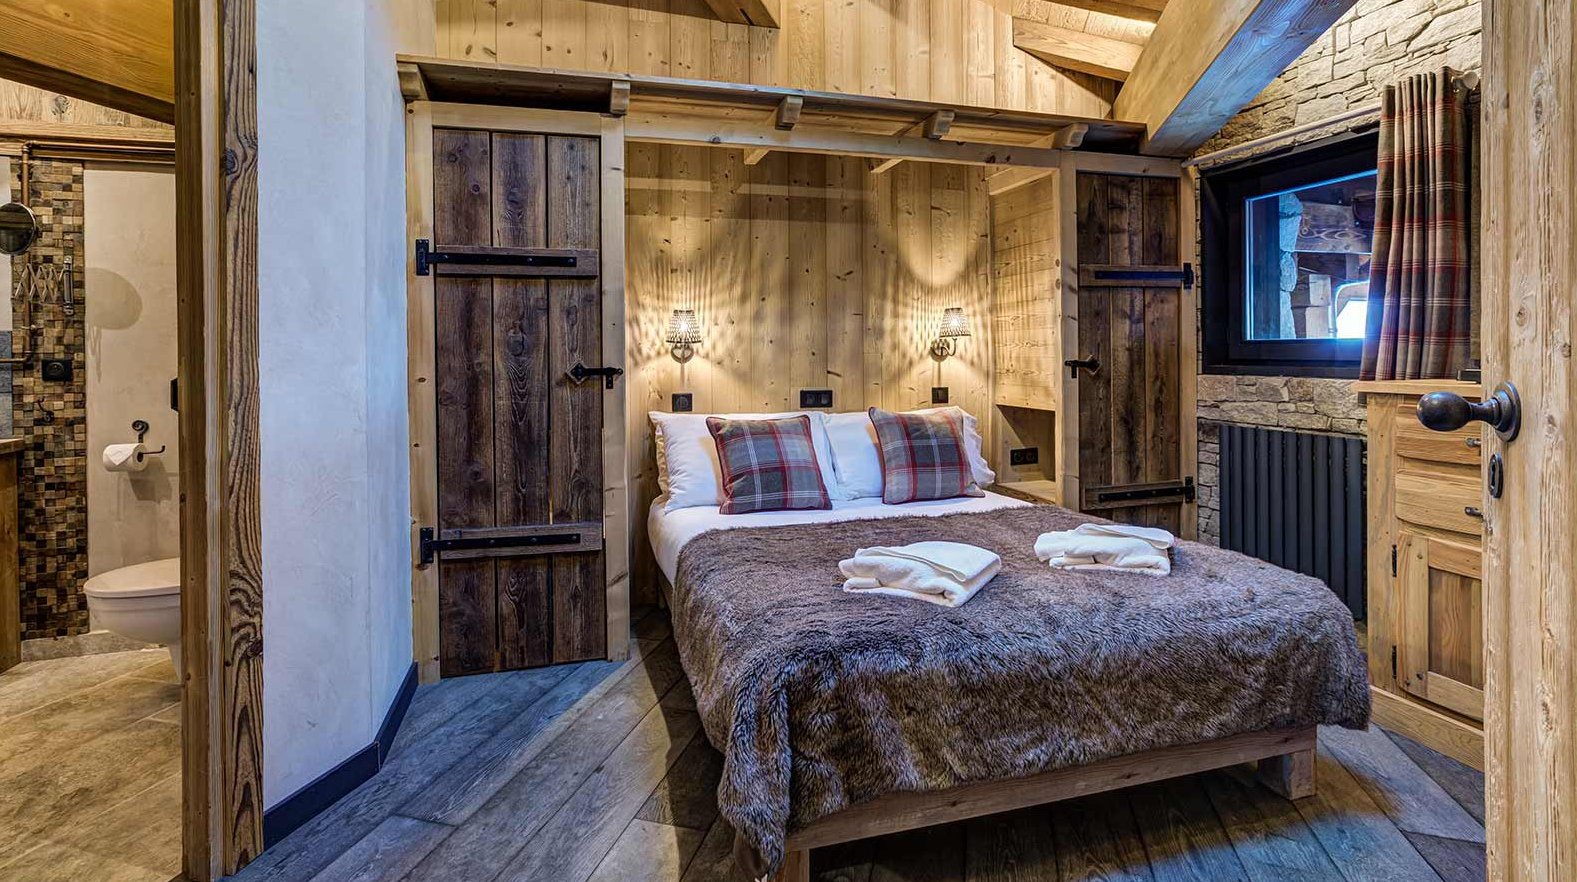 Chalet Jacques Bedroom